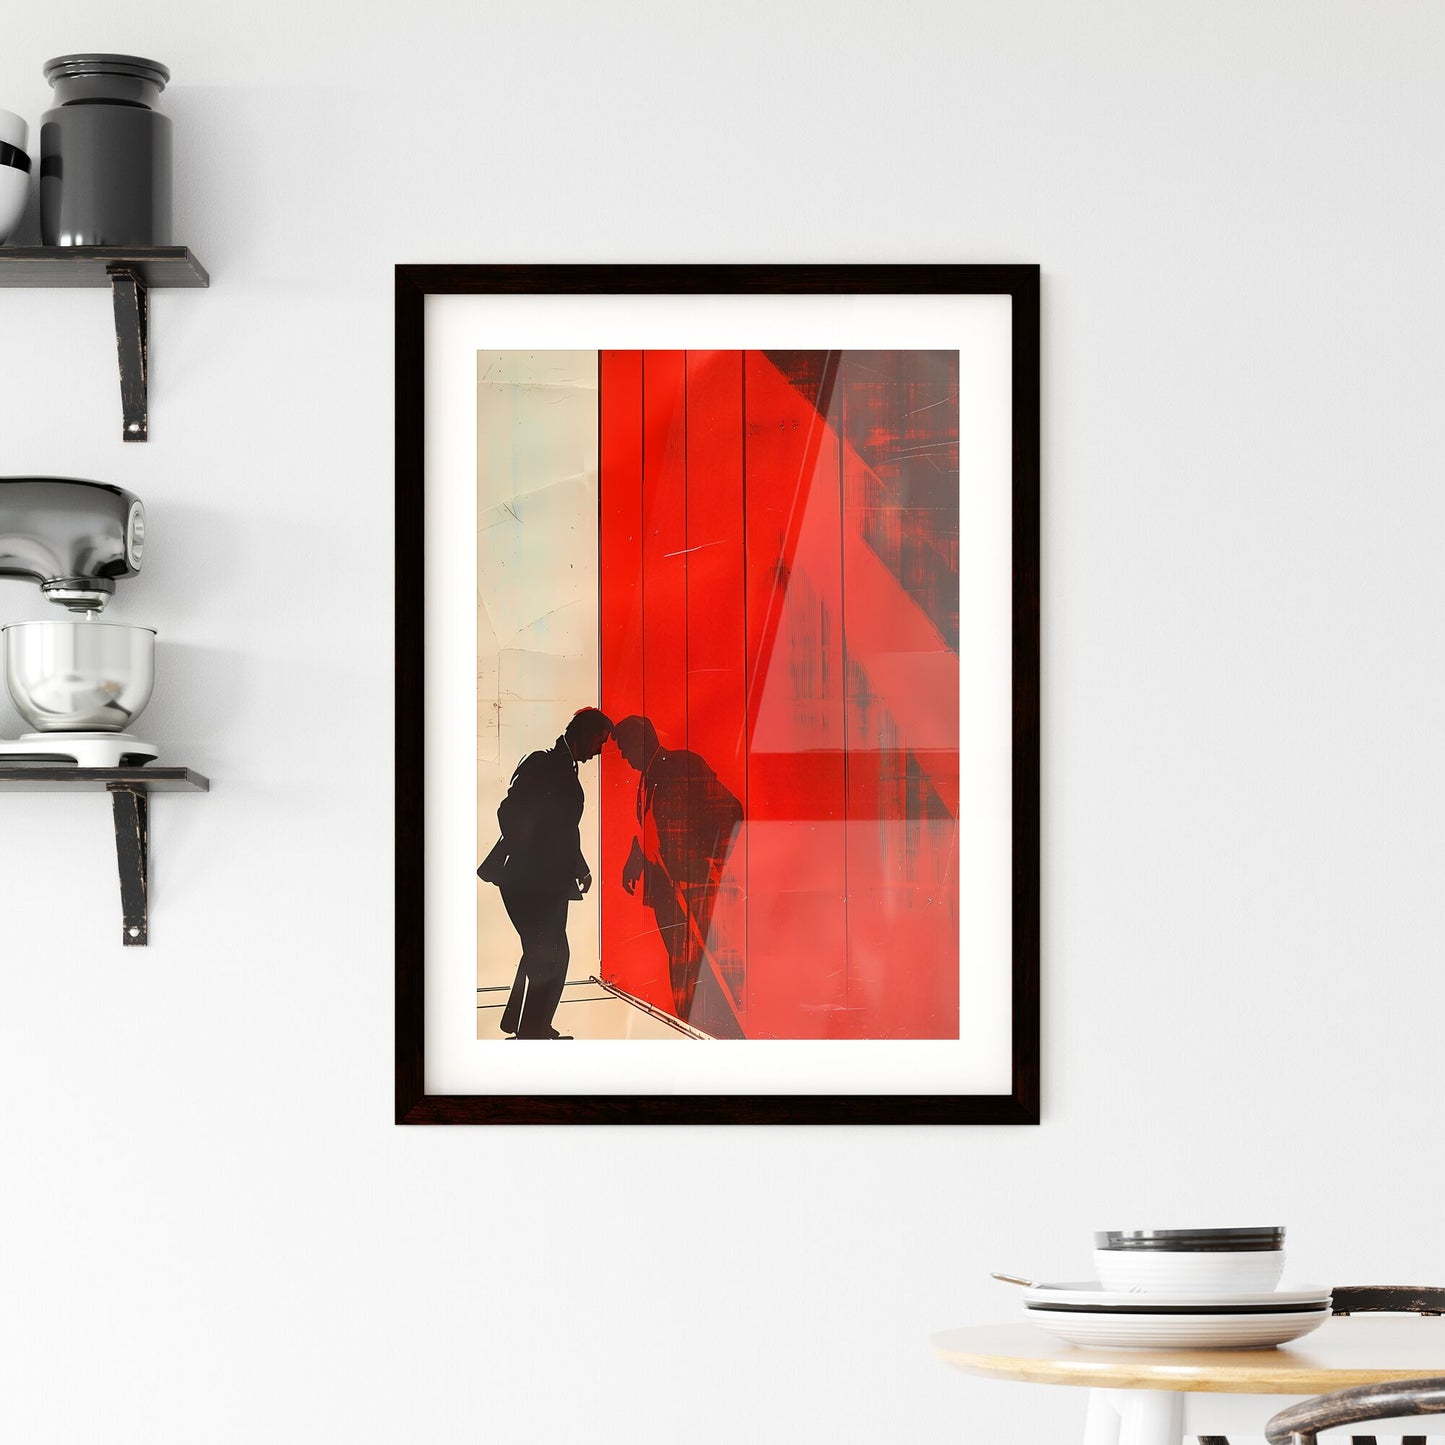 Vibrant Painting with Silhouette of Man and Woman, Propaganda-Style, Art Focus Default Title